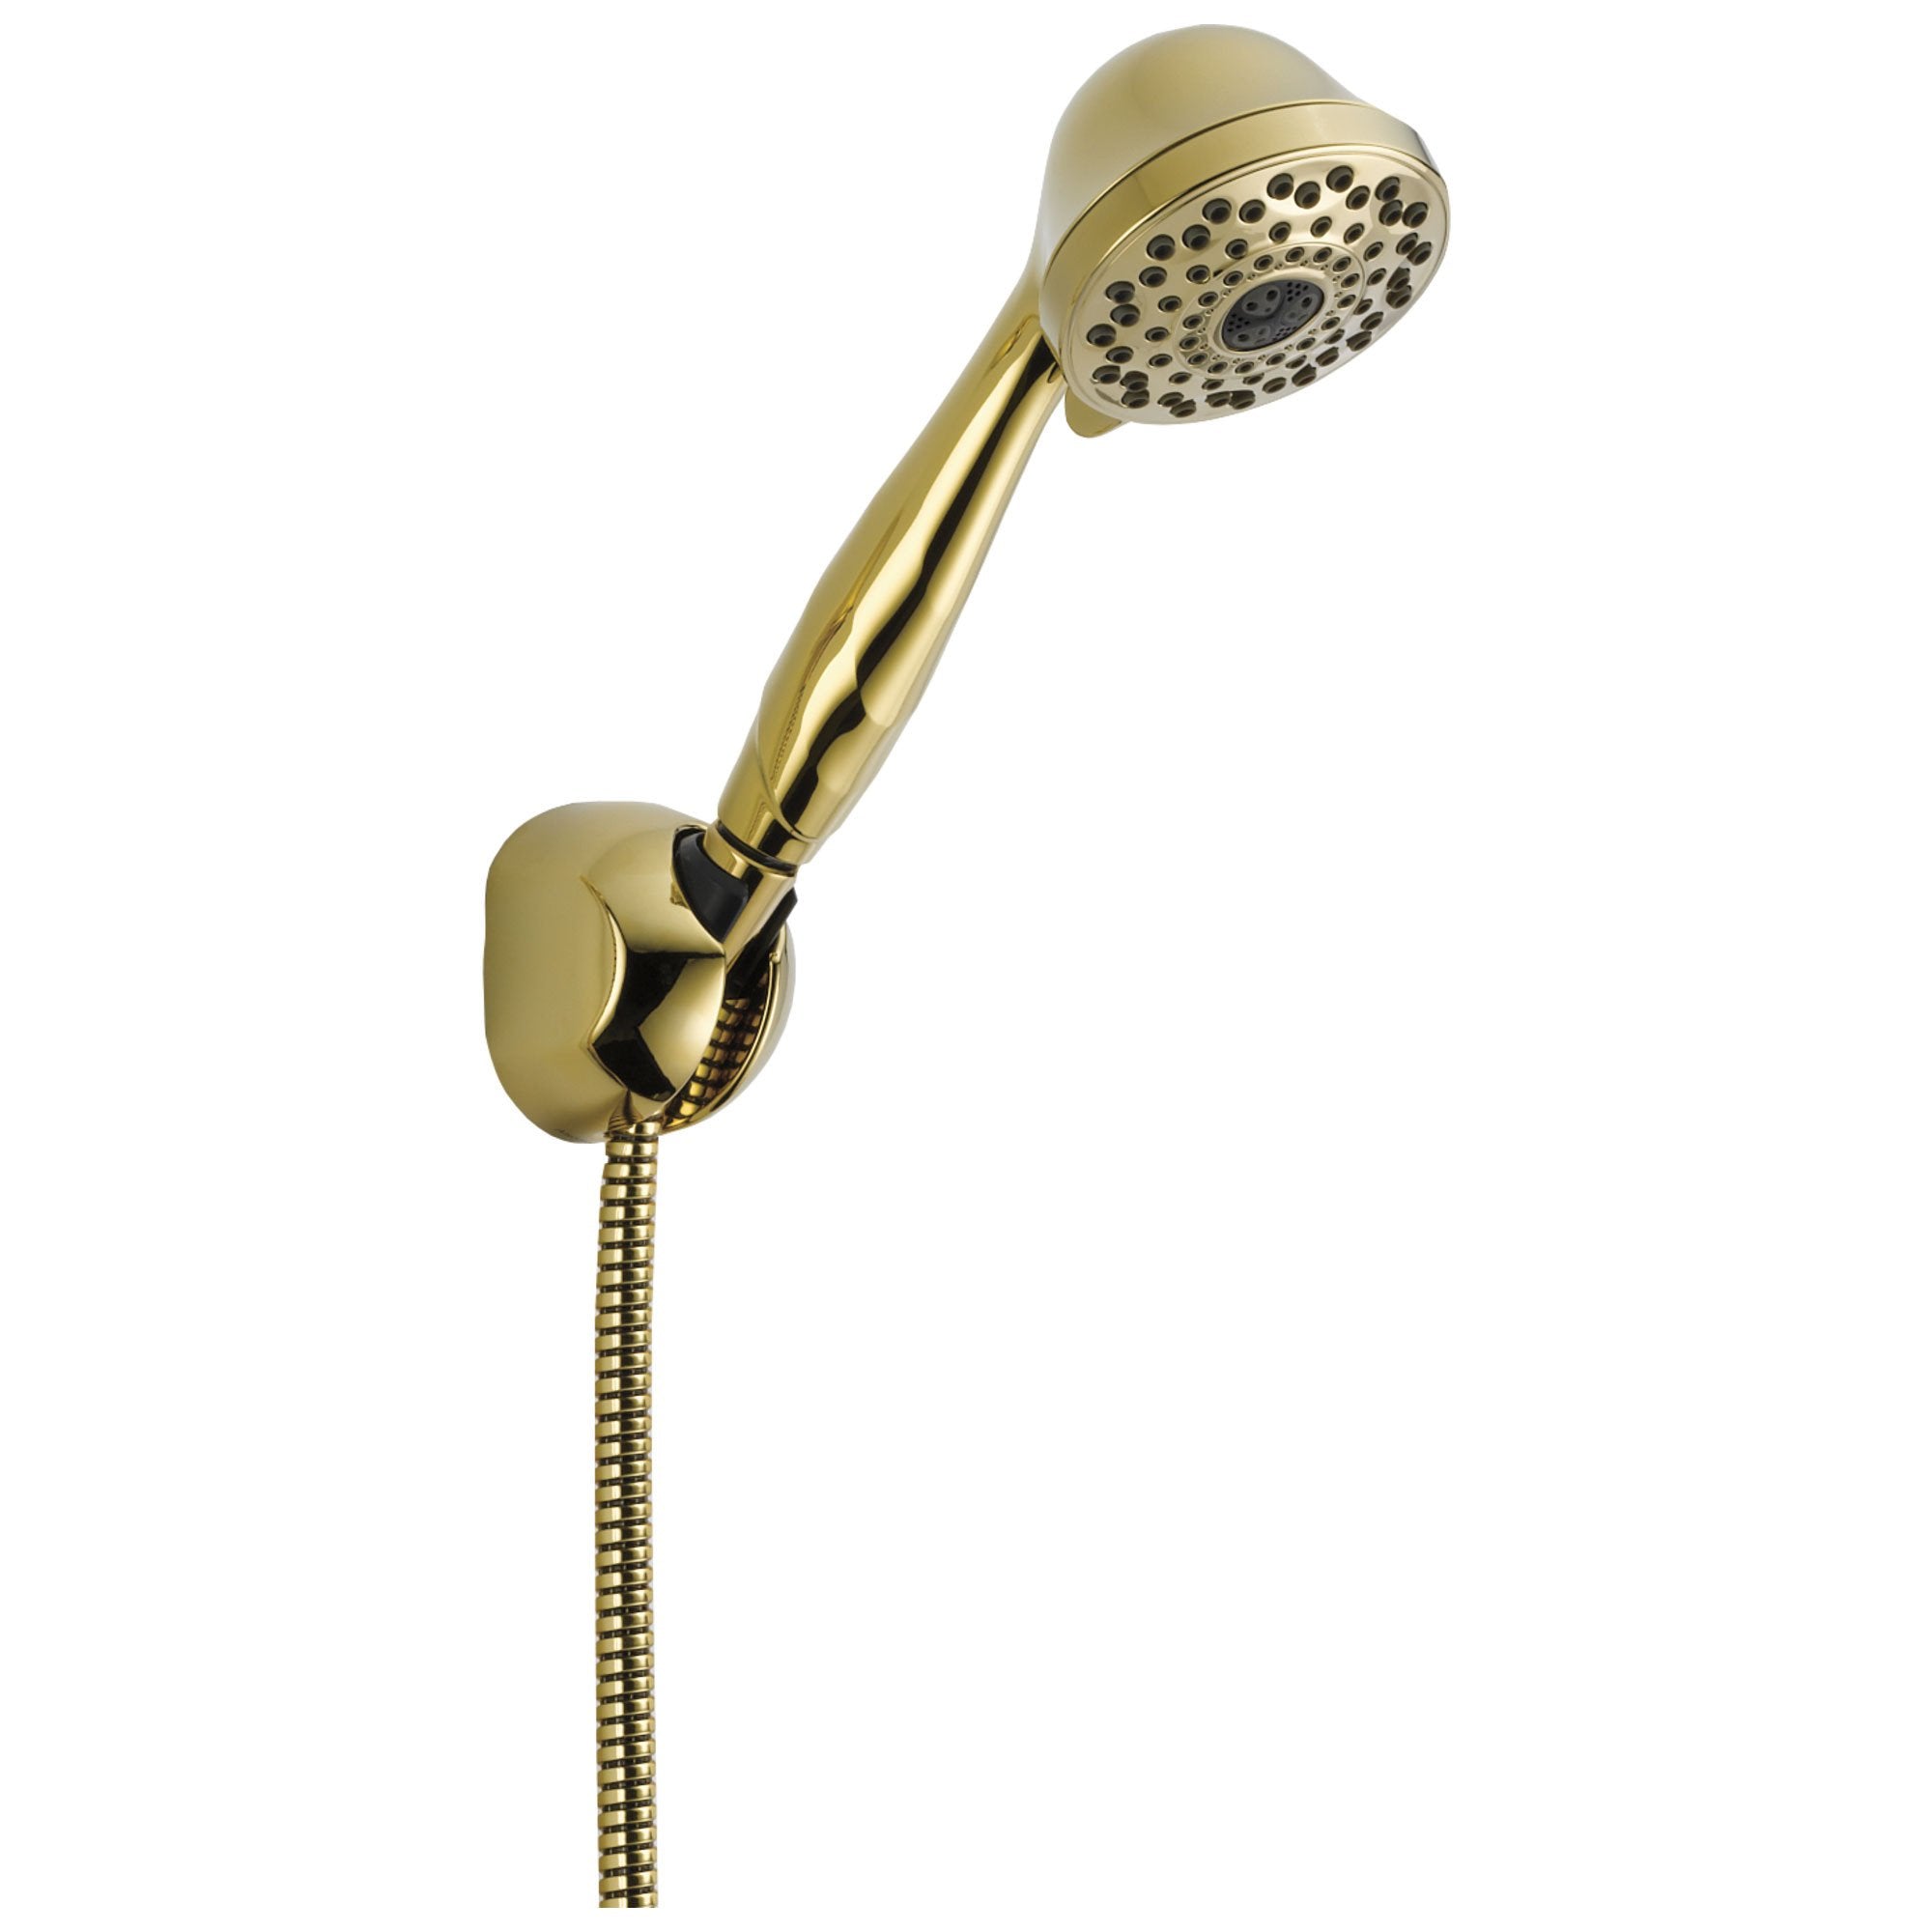 Delta Universal Showering Components Collection Polished Brass Finish 7-Setting Fixed Wall Mount Handheld Shower Sprayer and Hose 737154